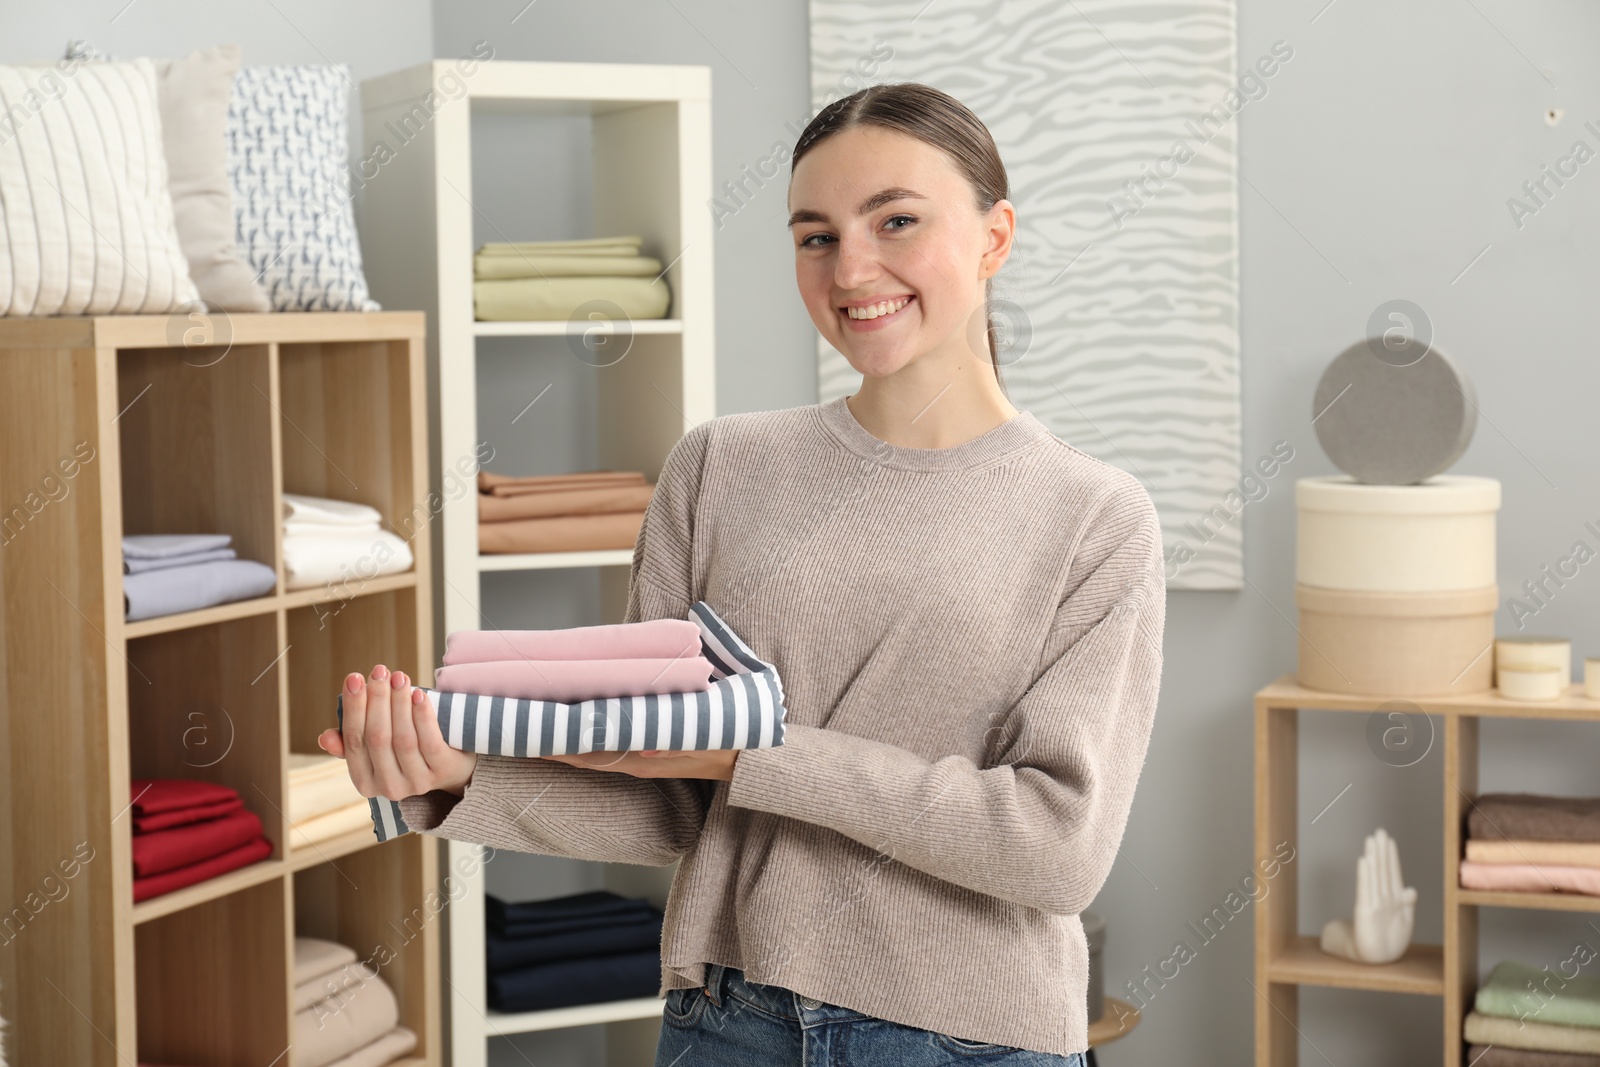 Photo of Smiling young woman with stack of bed linens in shop